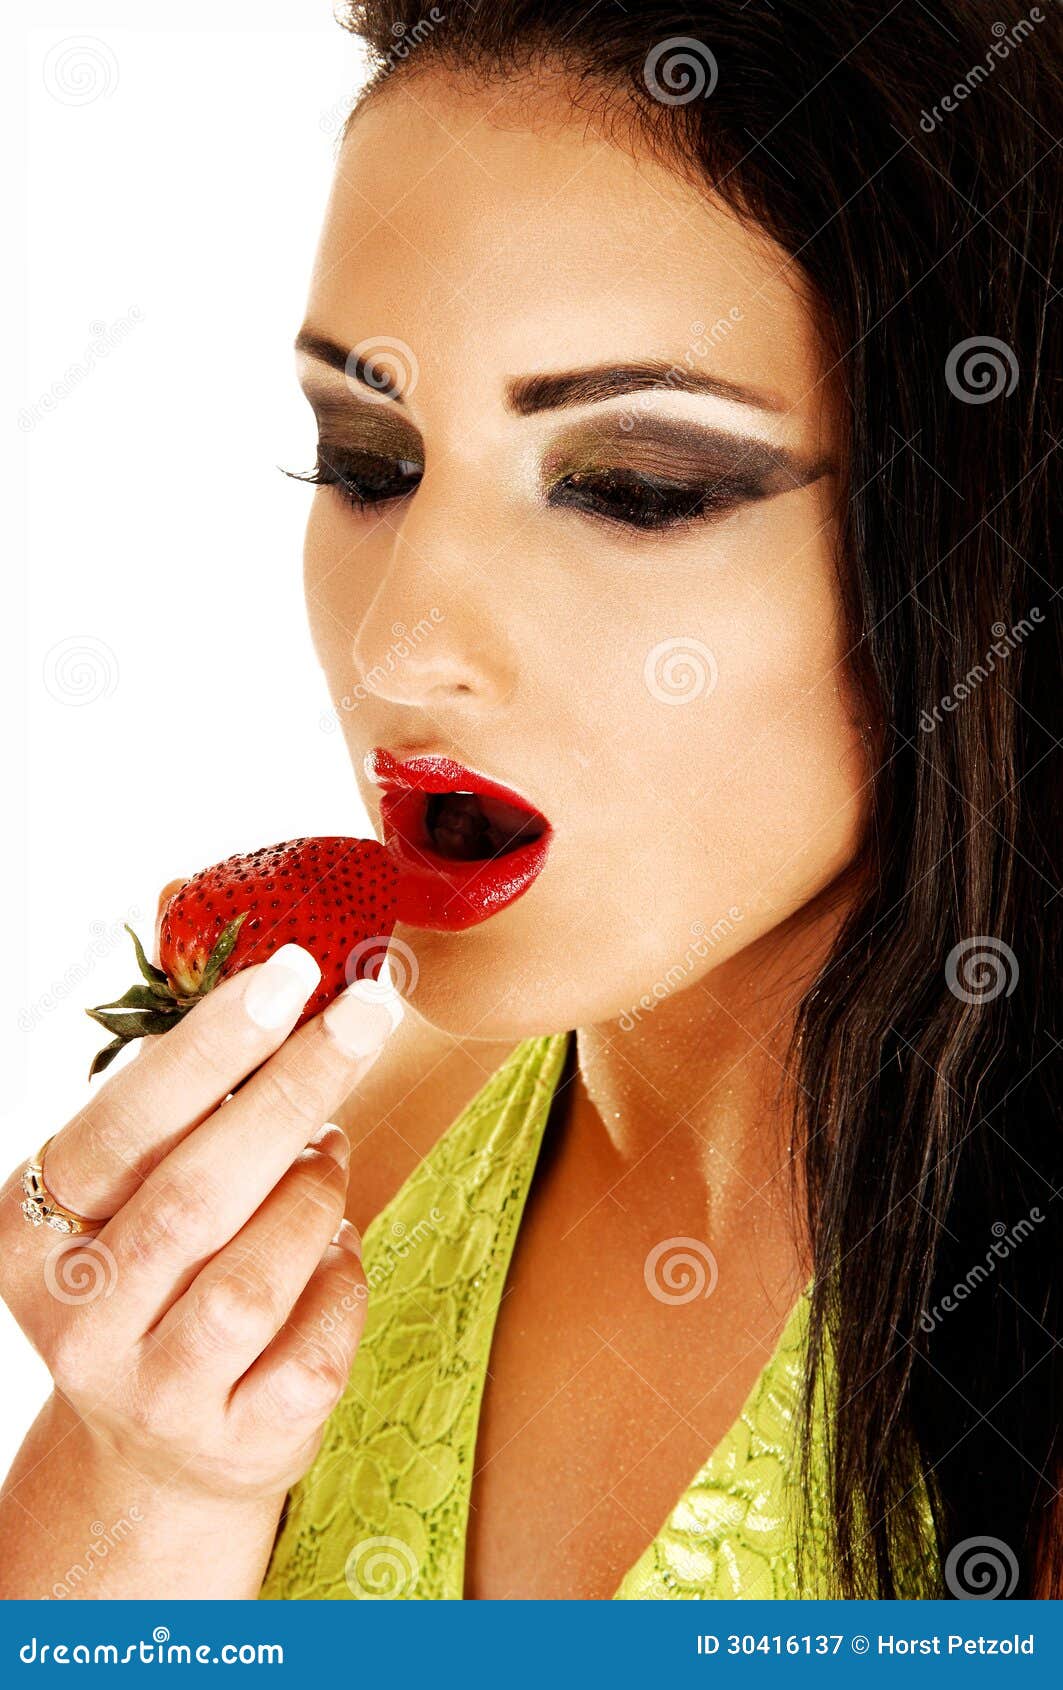 Teen Girl Eating Strawberry Stock Image Image Of Face Portrait 30416137